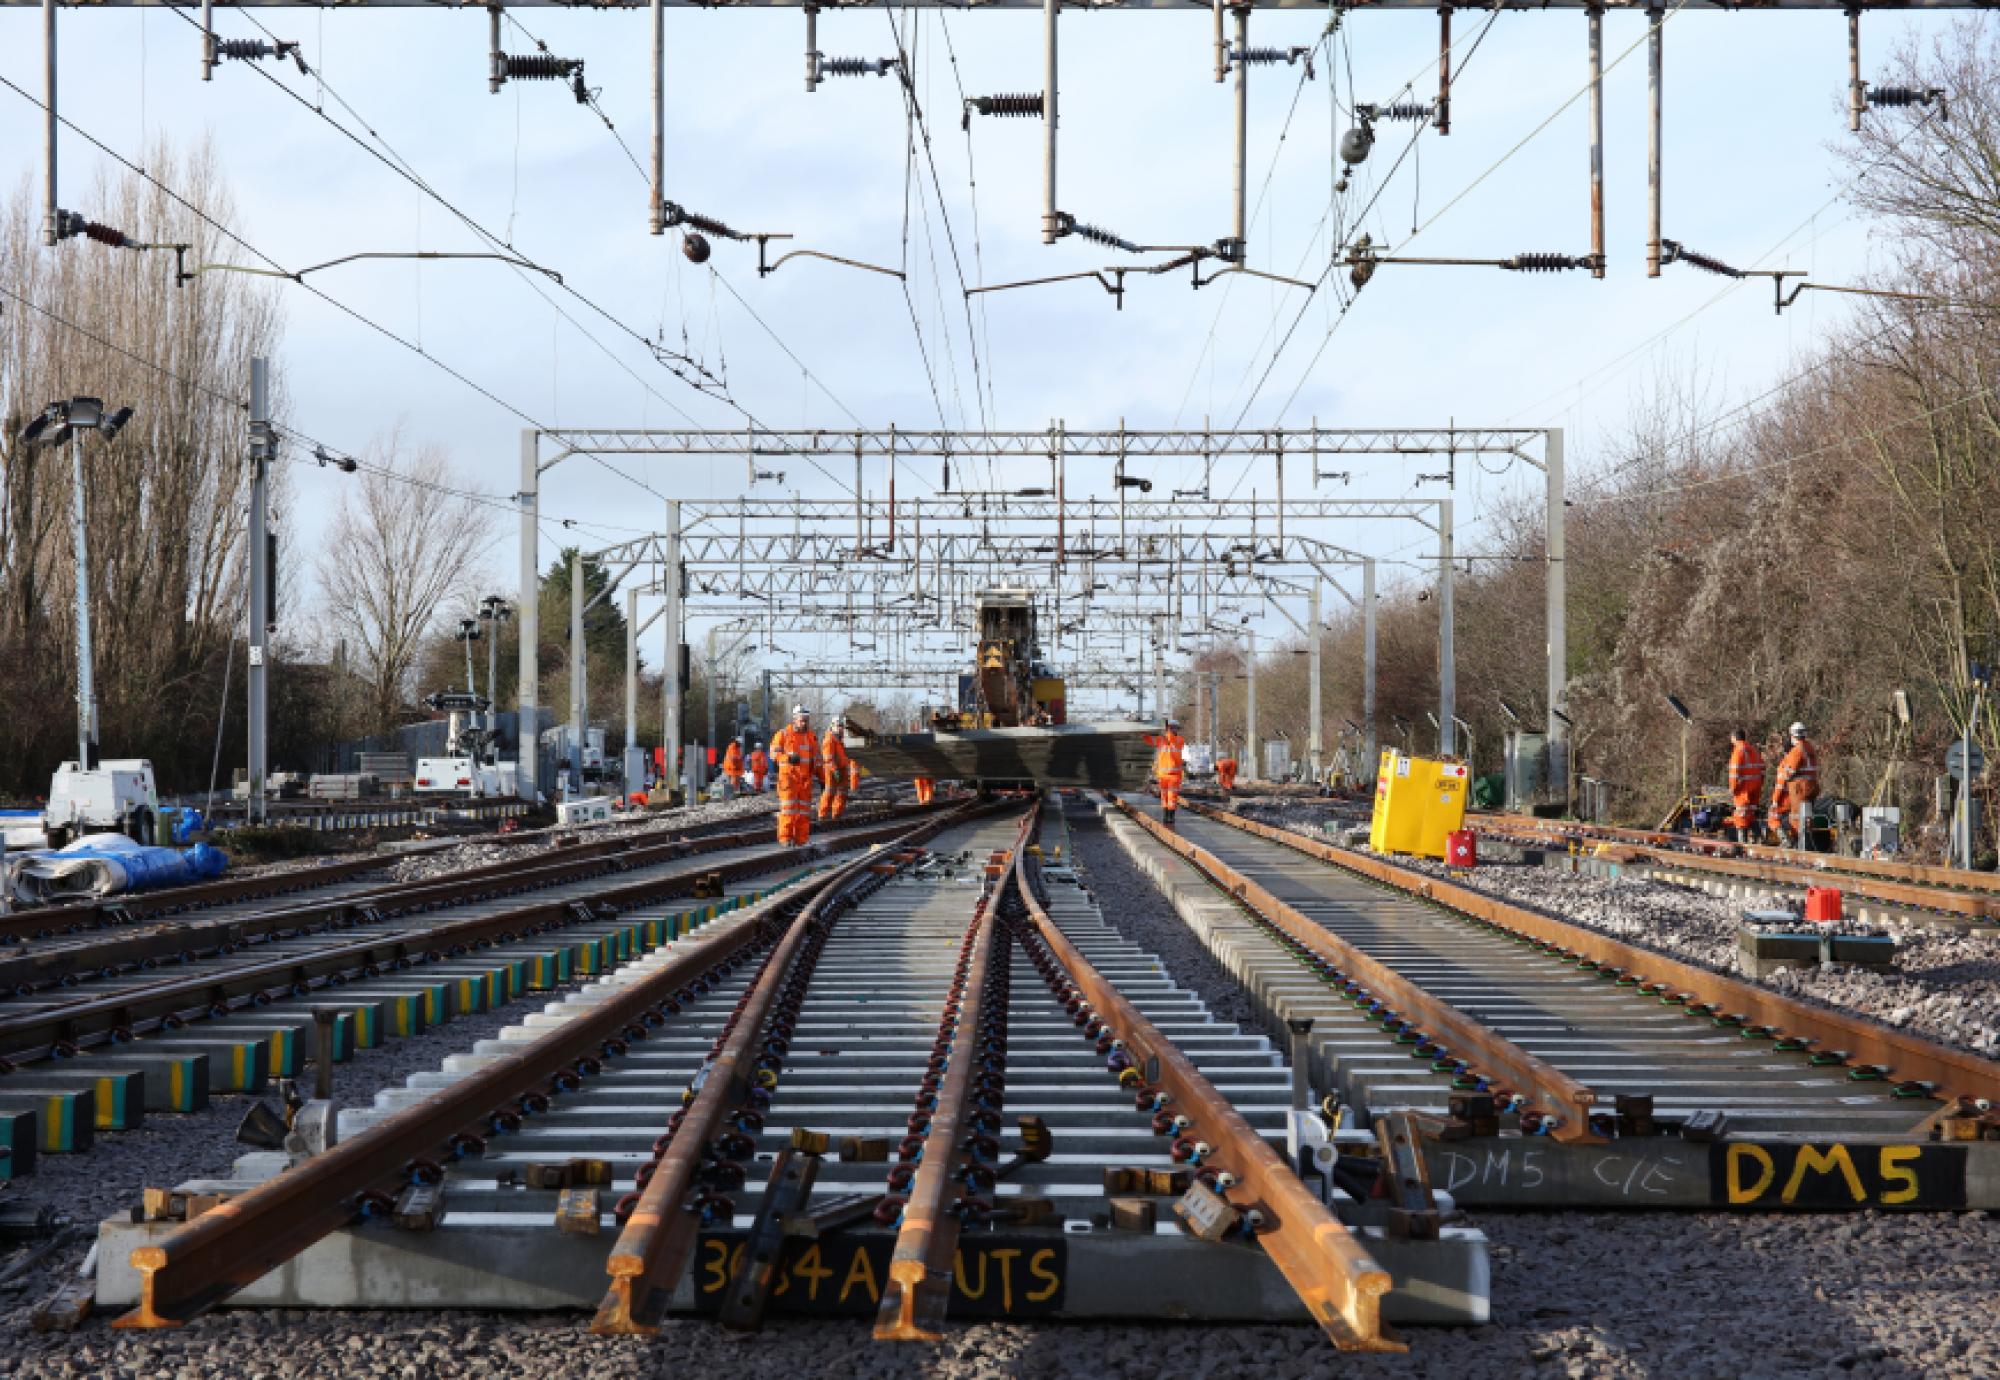 Network Rail engineers deliver vast improvements across the festive